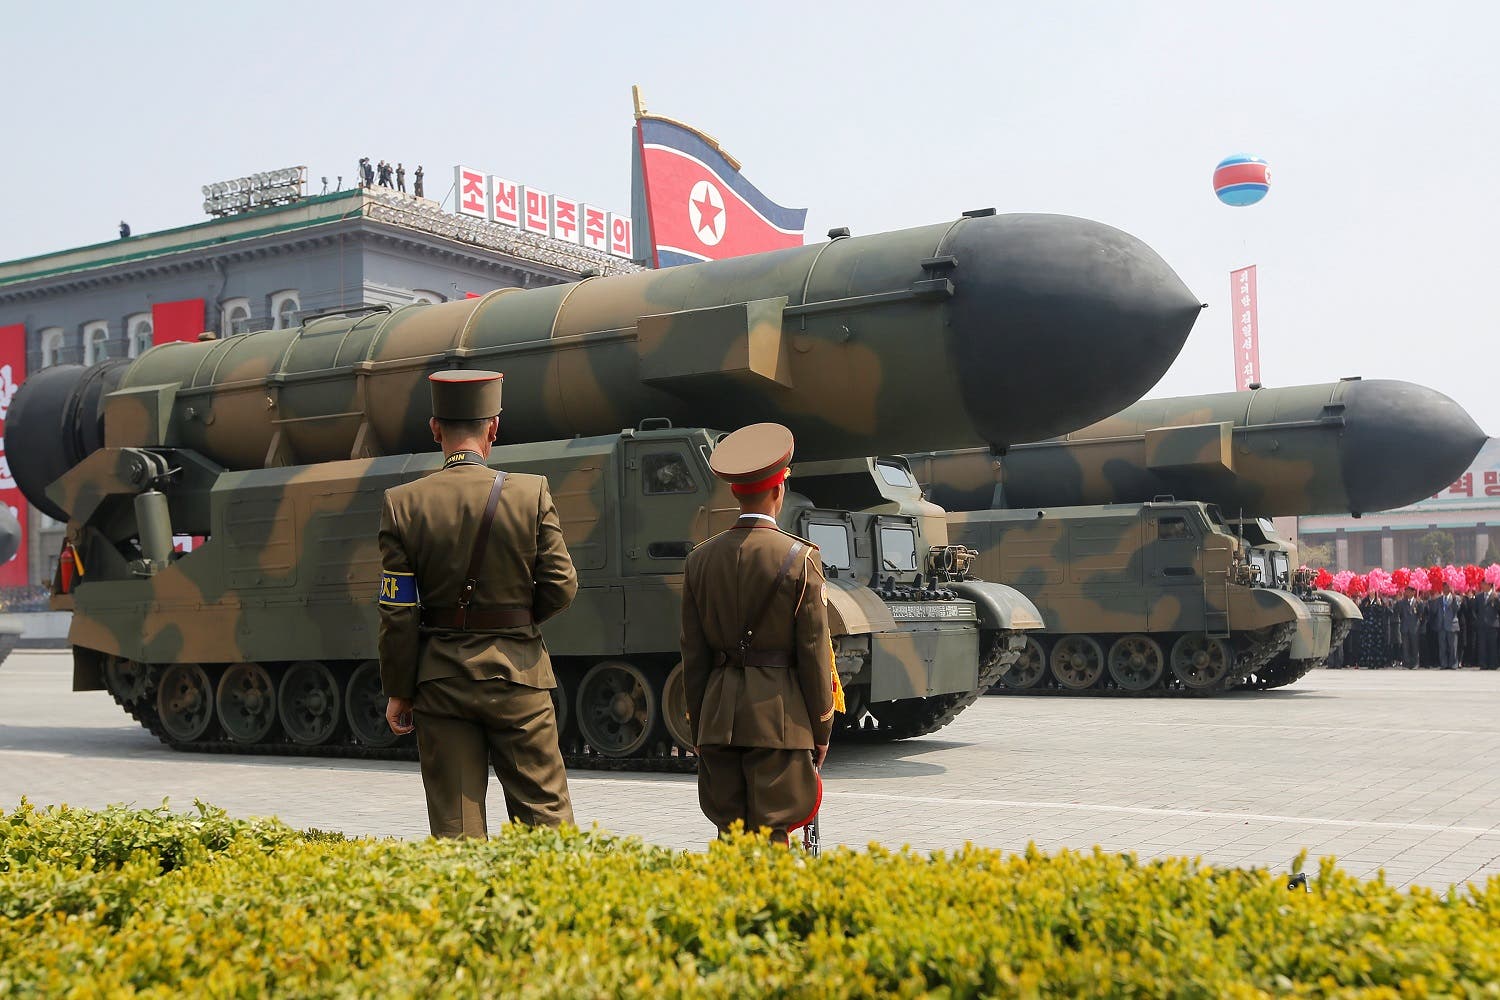 Missiles are driven past the stand with North Korean leader Kim Jong Un and other high ranking officials during a military parade marking the 105th birth anniversary of North Korea's founding father, Kim Il Sung, in Pyongyang, April 15, 2017. (Reuters)